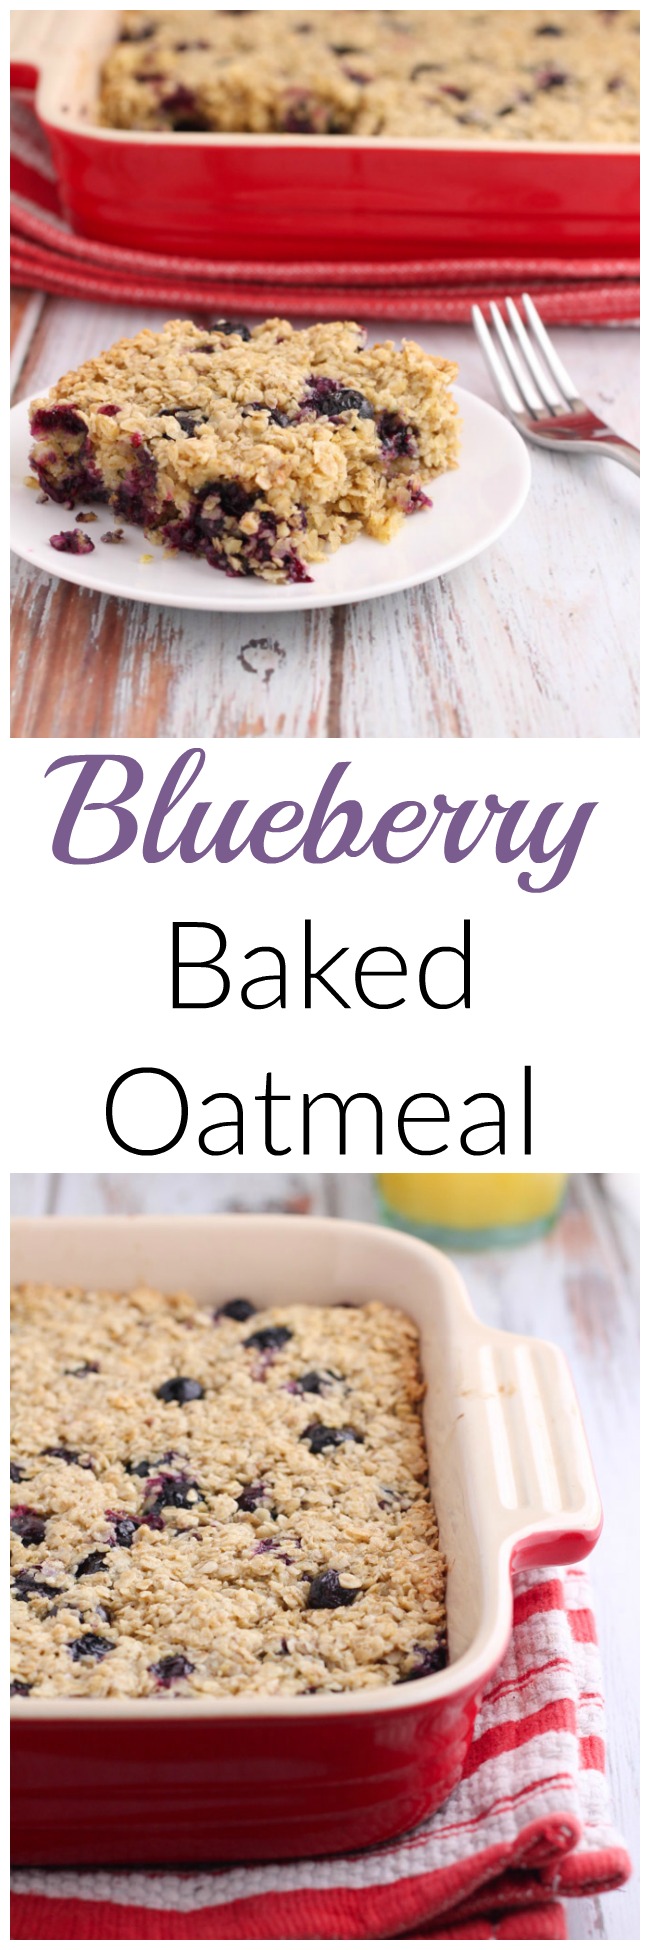 Ready in about 35 minutes this easy recipe for blueberry baked oatmeal is sure to please,even beyond breakfast! www.cookingismessy.com